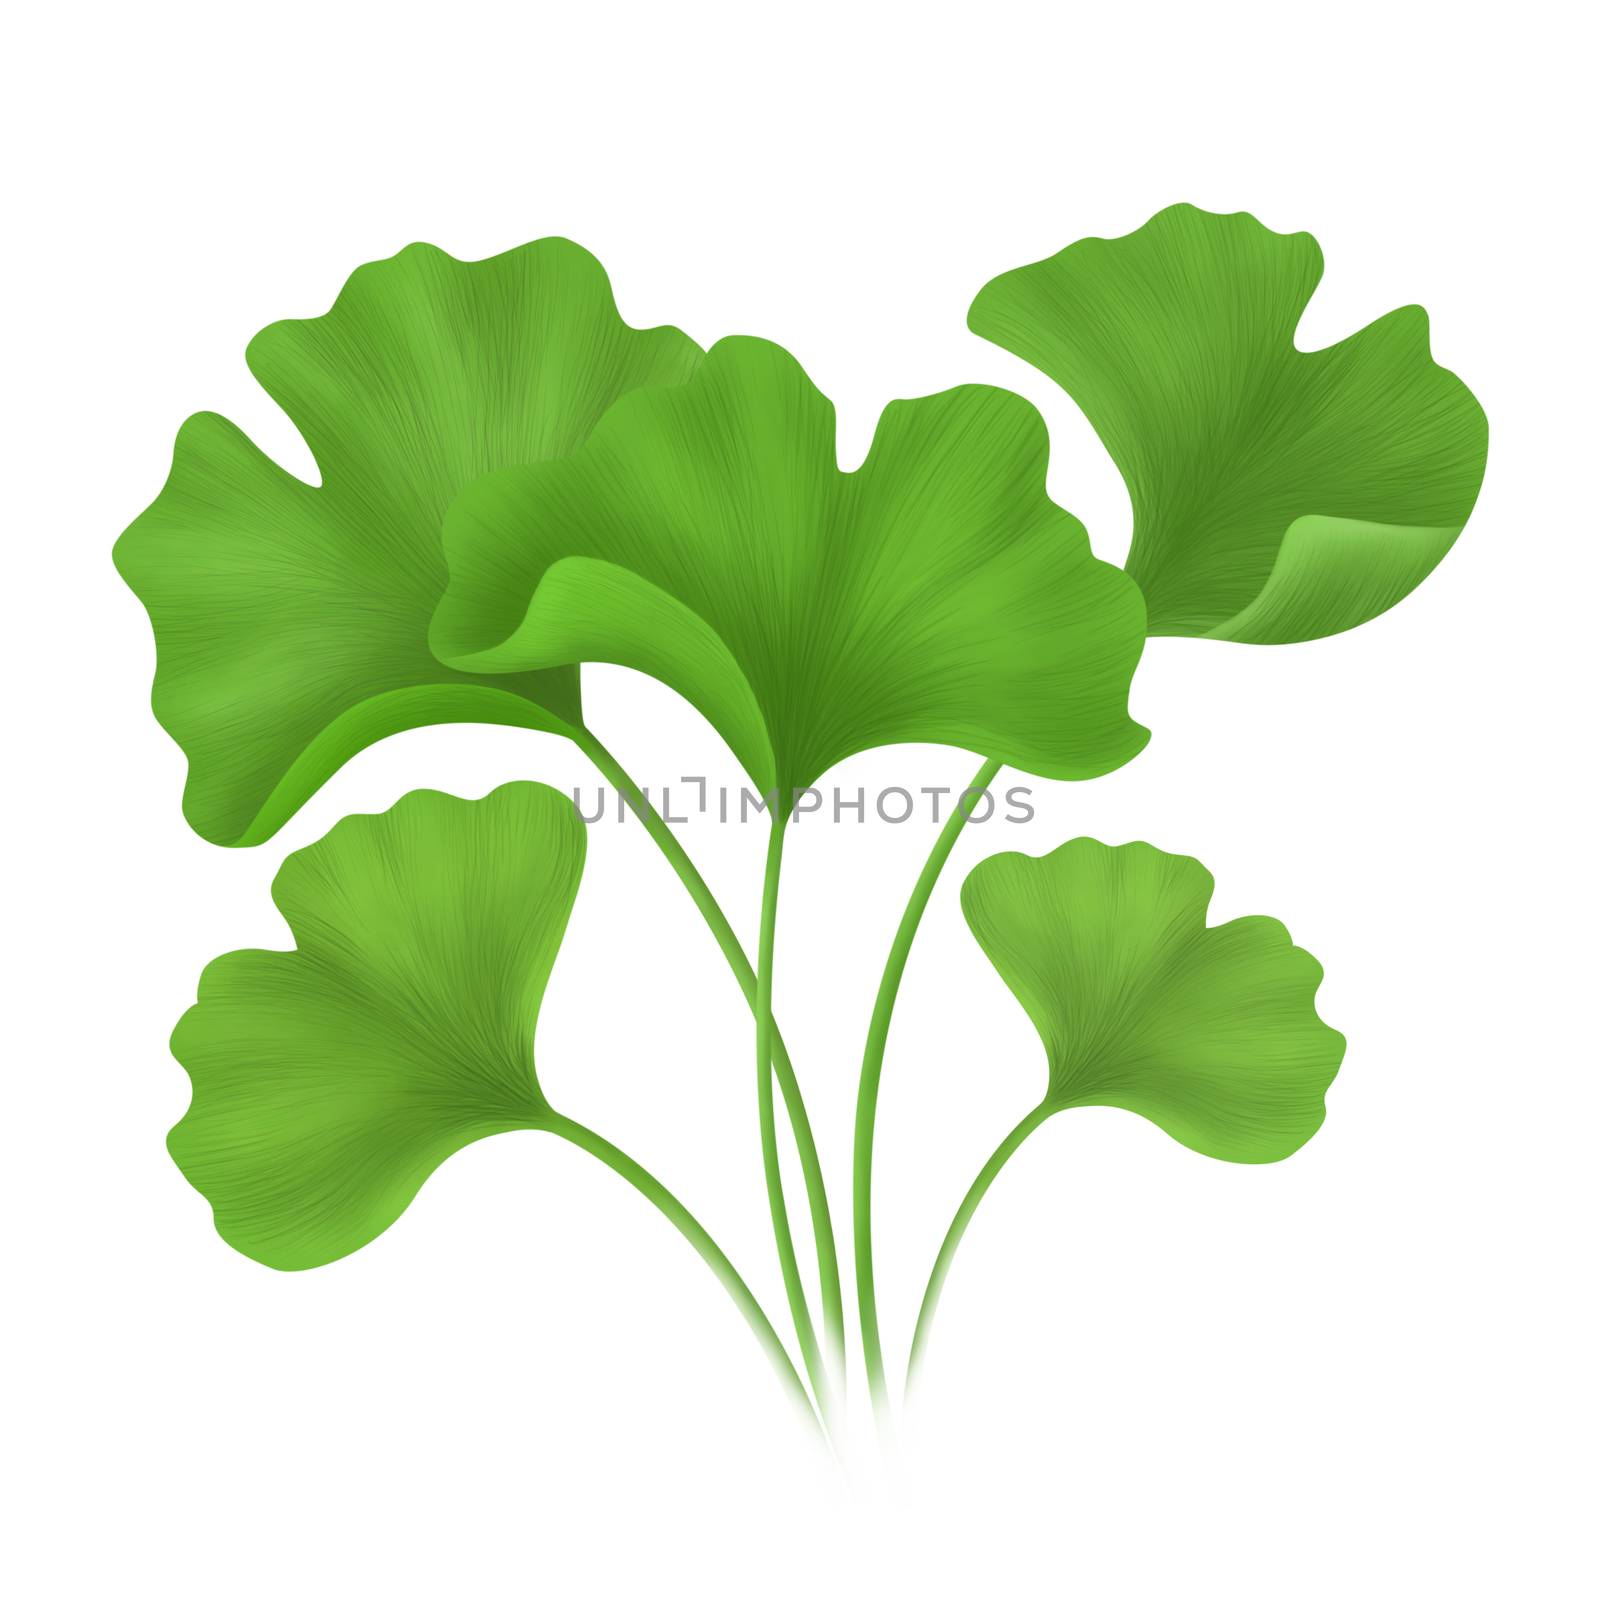 Digital illustration ginkgo biloba leaves isolated on white background, herb and medical concept